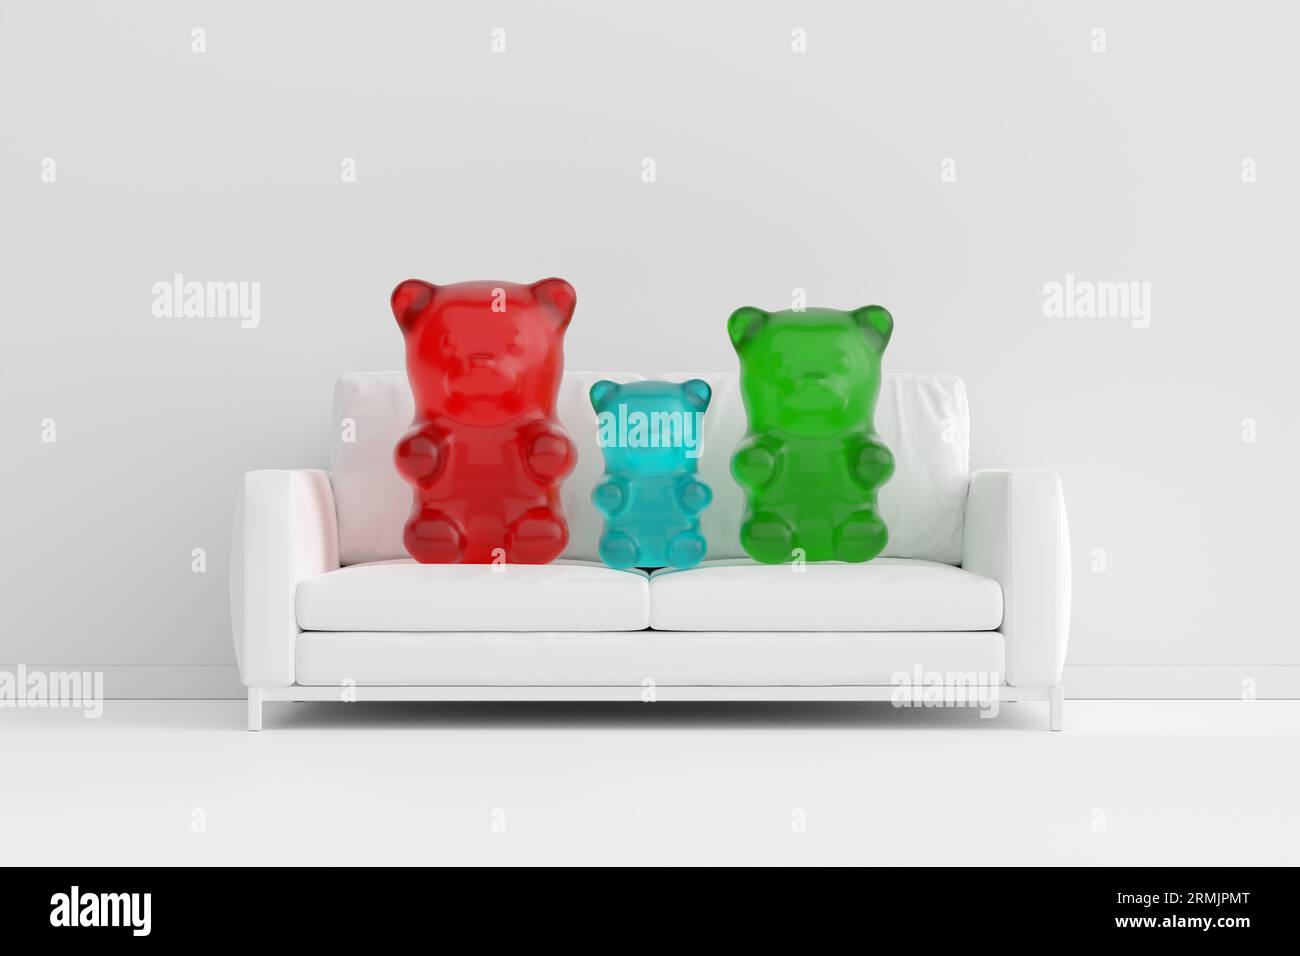 Family, marriage and relationship concept. Mother, father and child gummy bears sitting on a white couch. Abstract 3D render. Stock Photo